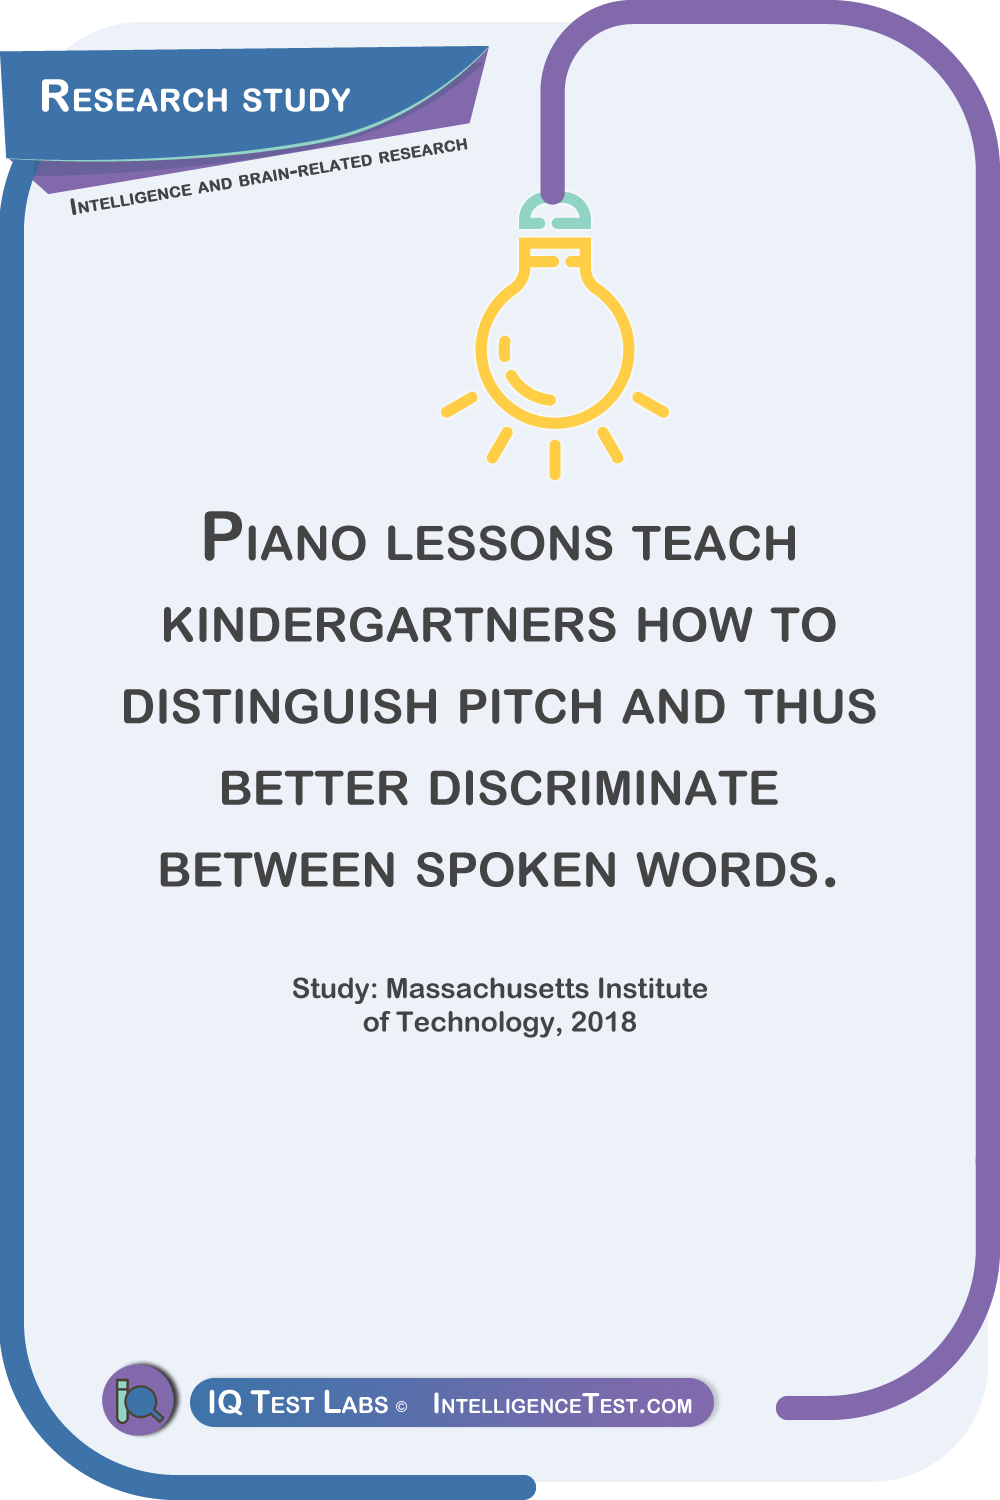 Piano lessons teach kindergartners how to distinguish pitch and thus better discriminate between spoken words. Study: Massachusetts Institute of Technology, 2018.